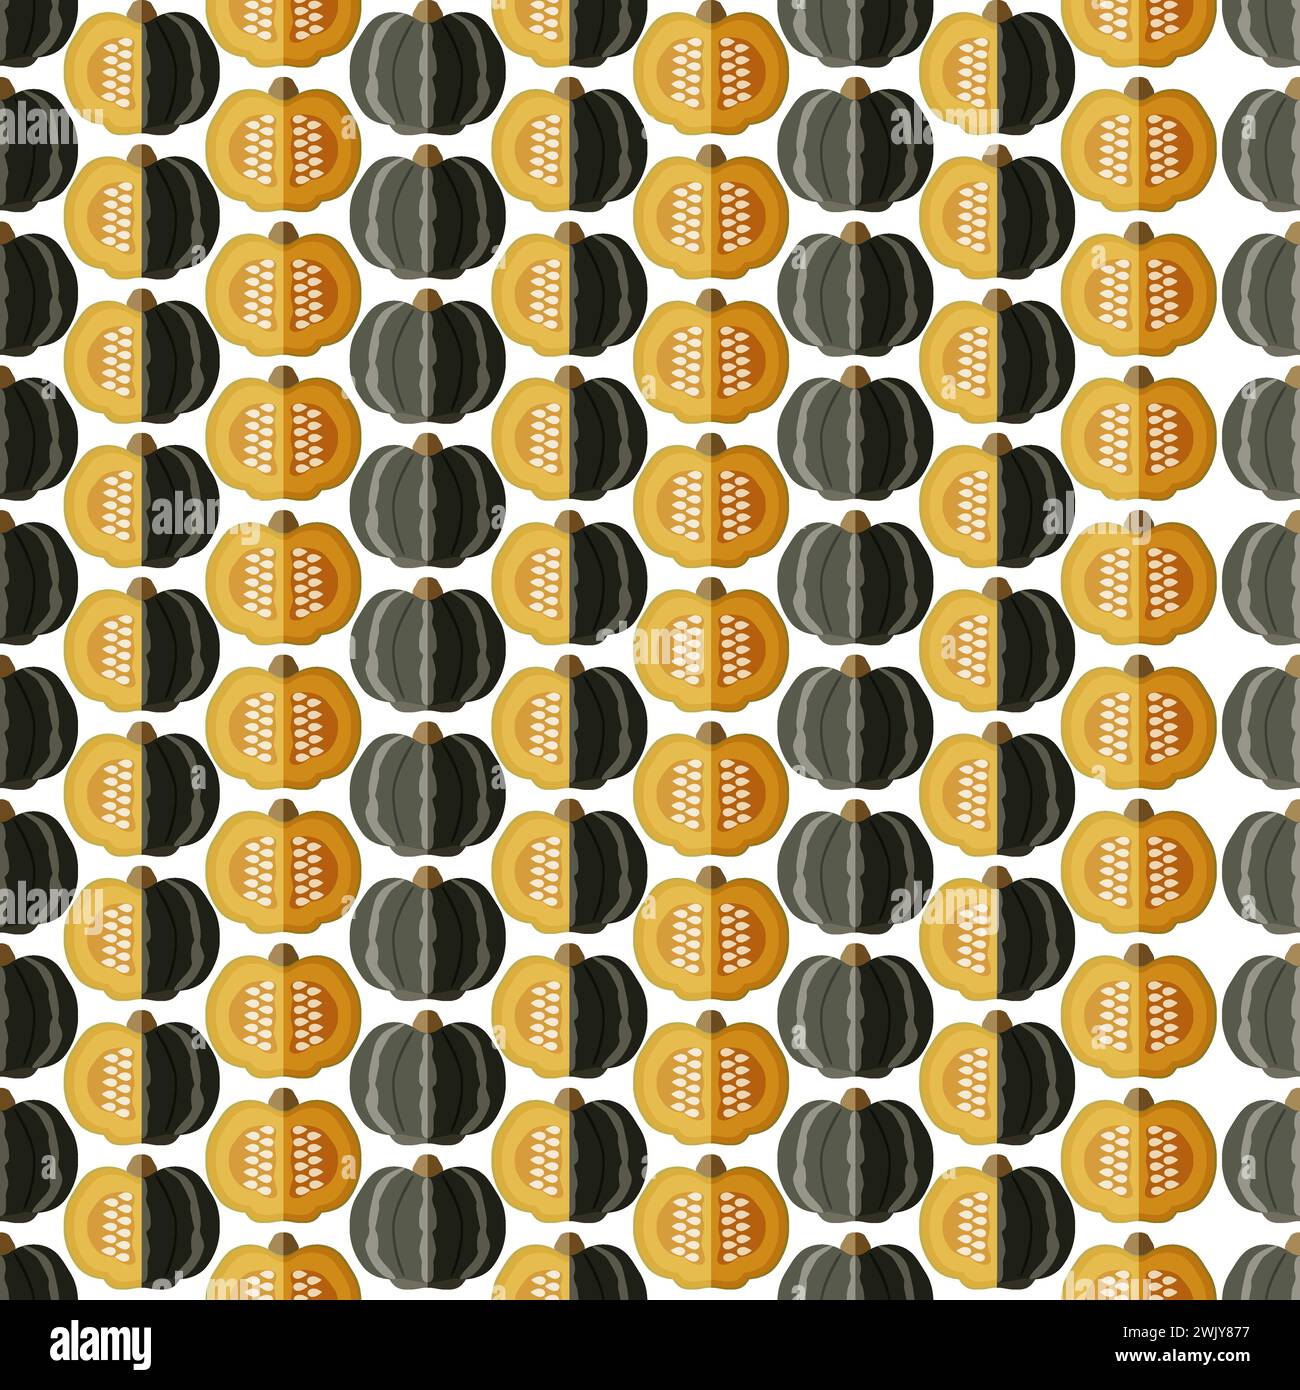 Seamless pattern with Bonbon Squash. Winter squash. Cucurbita maxima. Fruit and vegetables. Flat style. Isolated vector illustration. Stock Vector